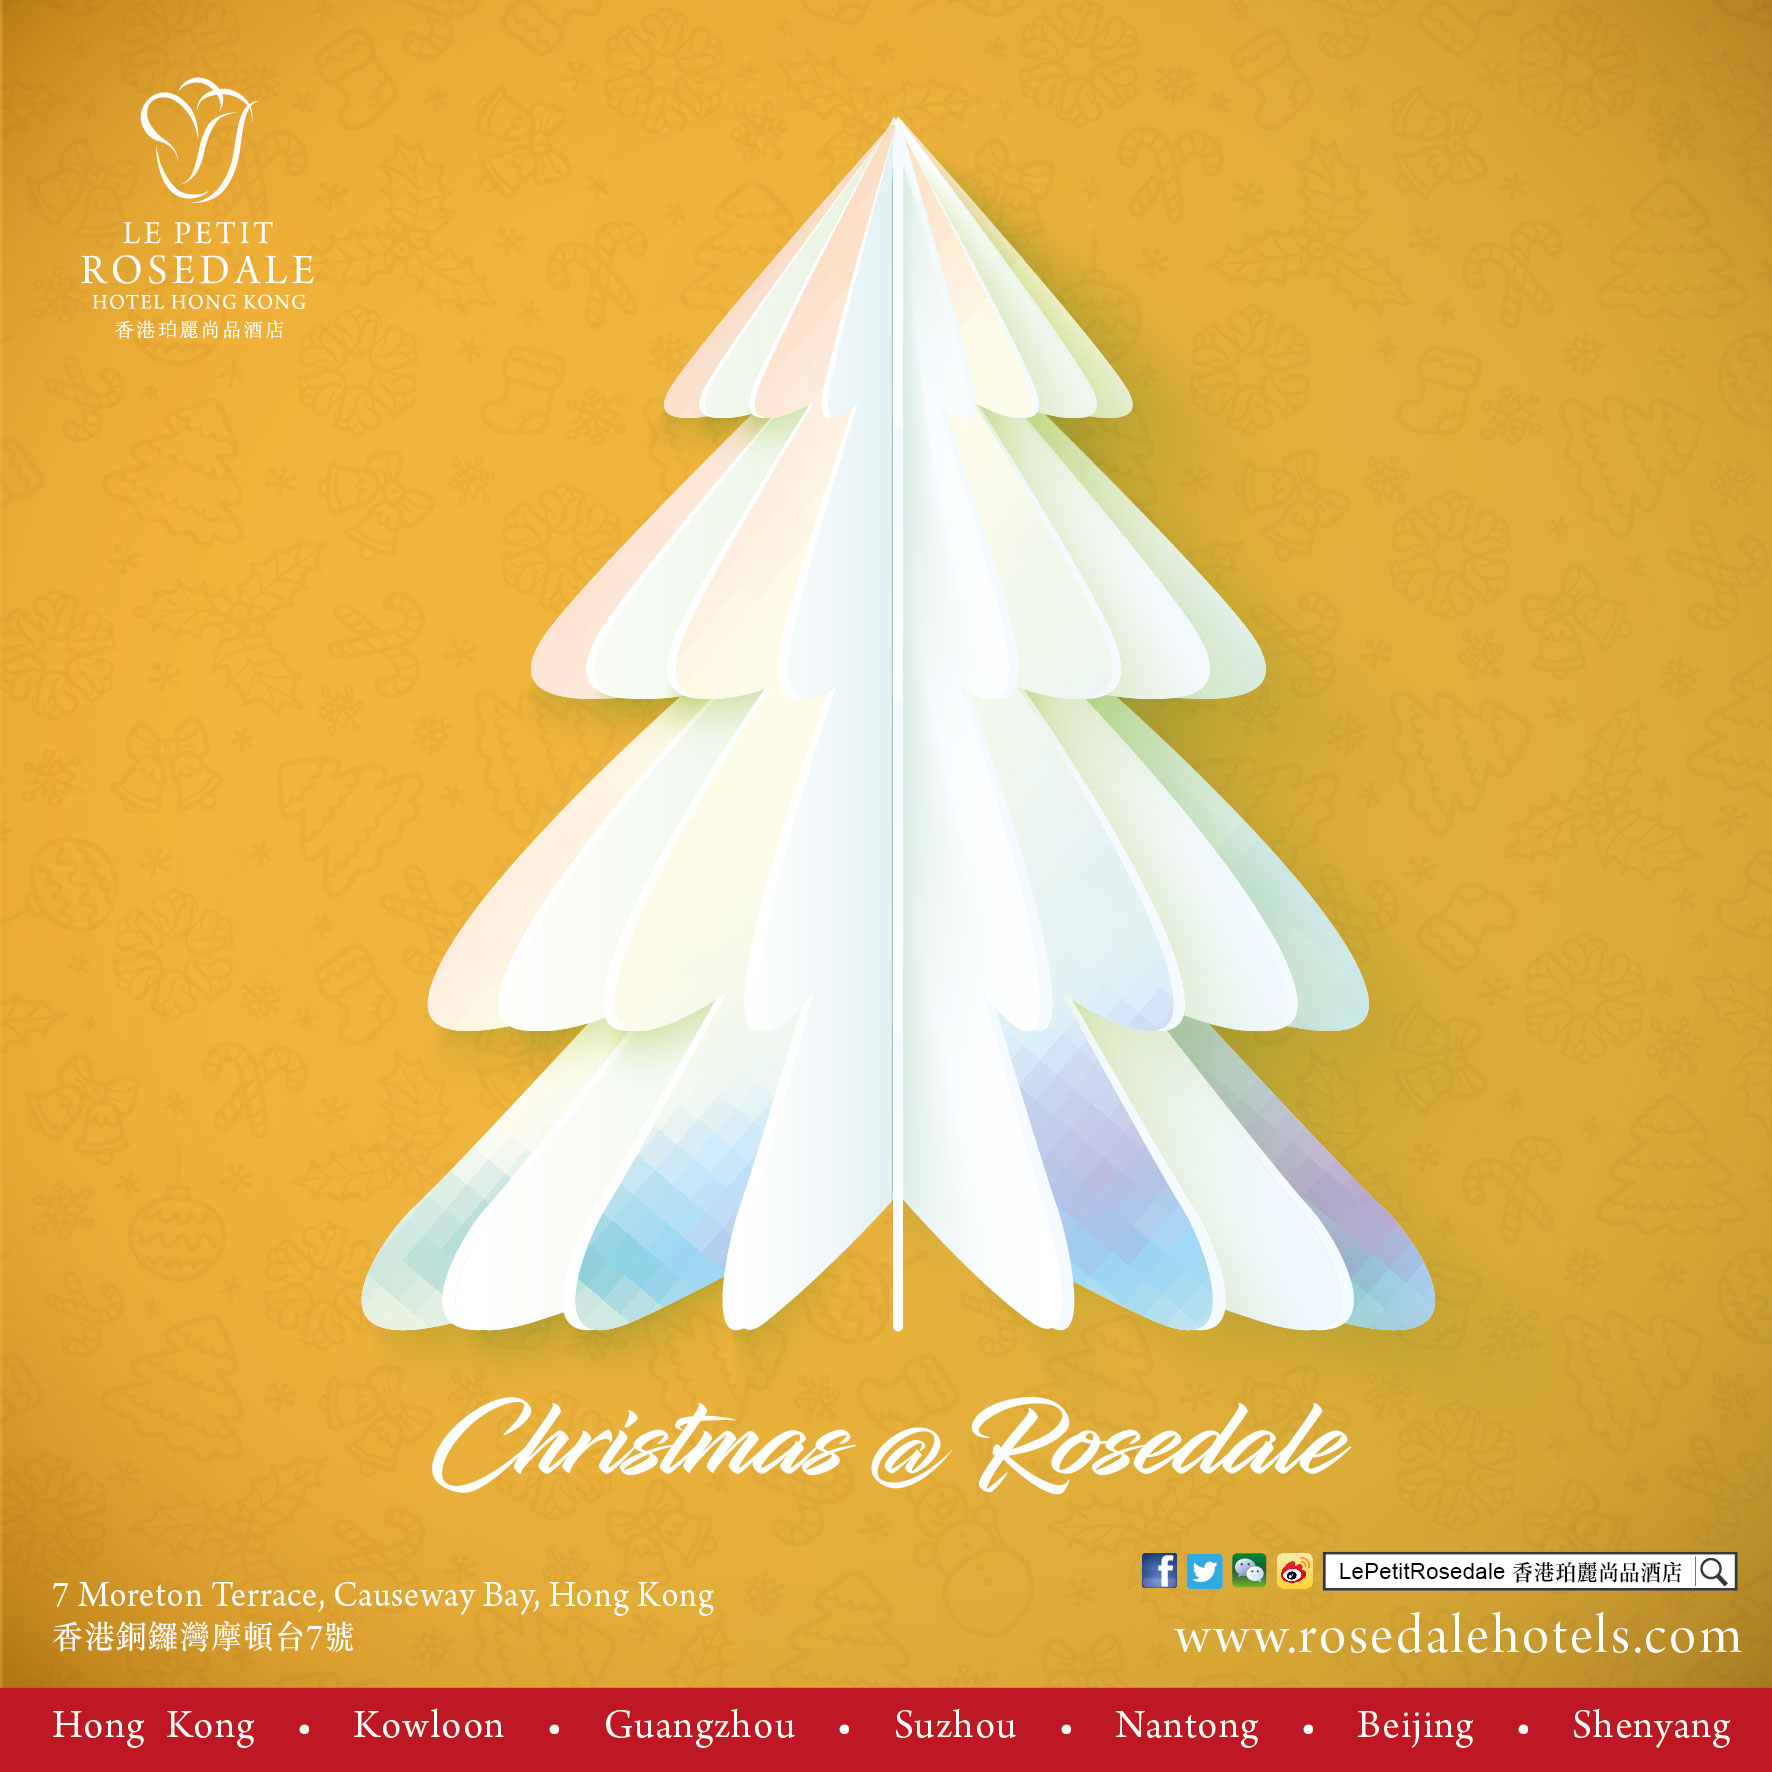 Festive Christmas and New Year Celebrations at Rosedale